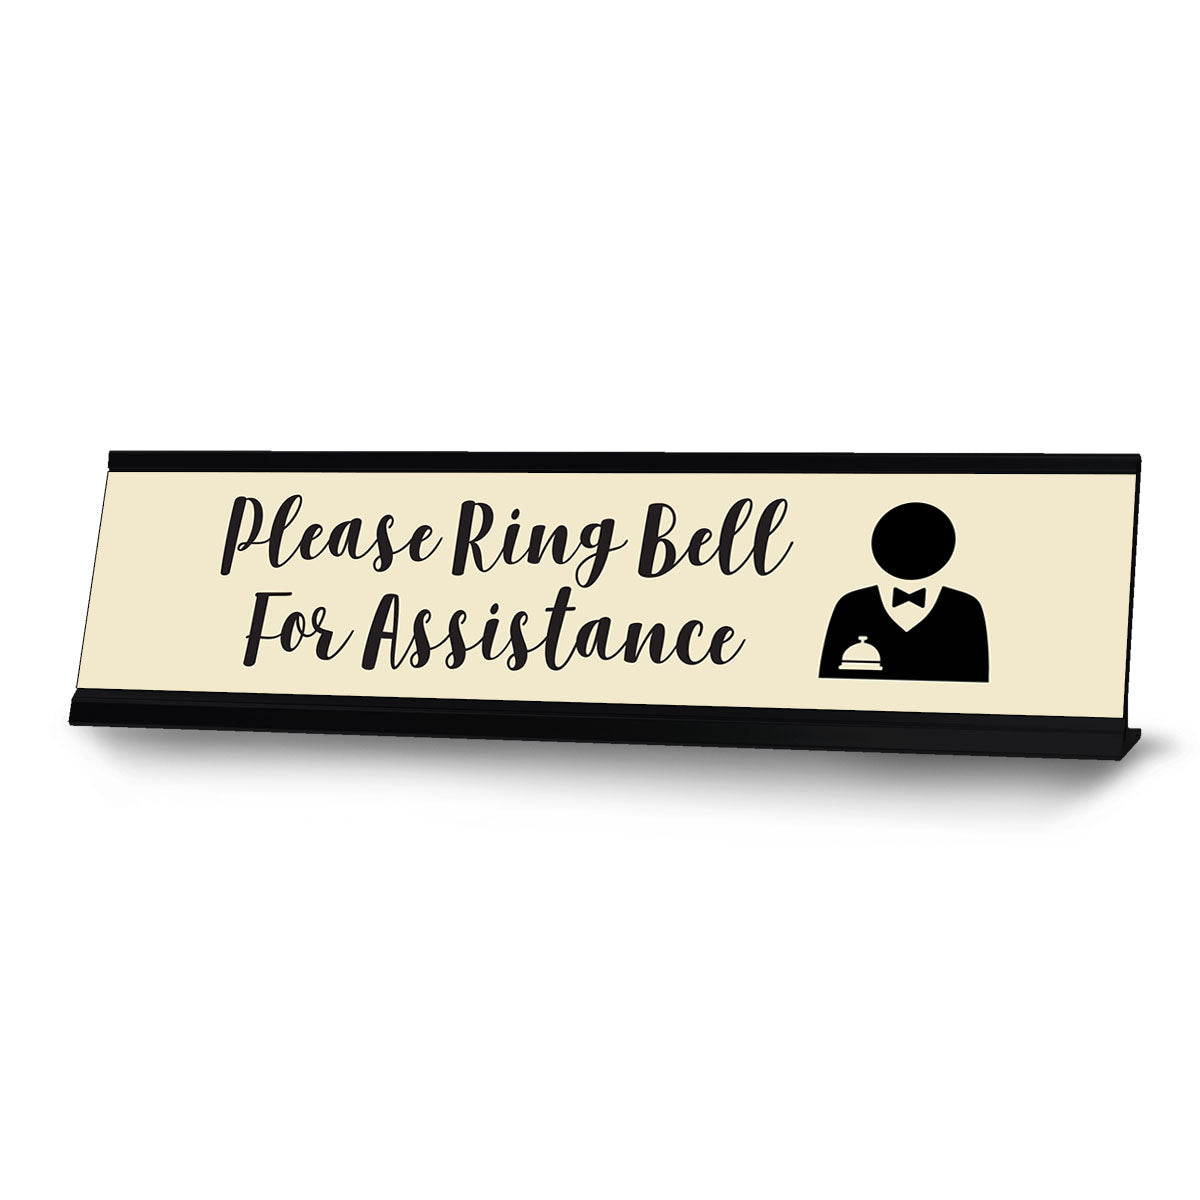 PLEASE RING BELL IF DESK IS UNATTENDED - American Sign Company